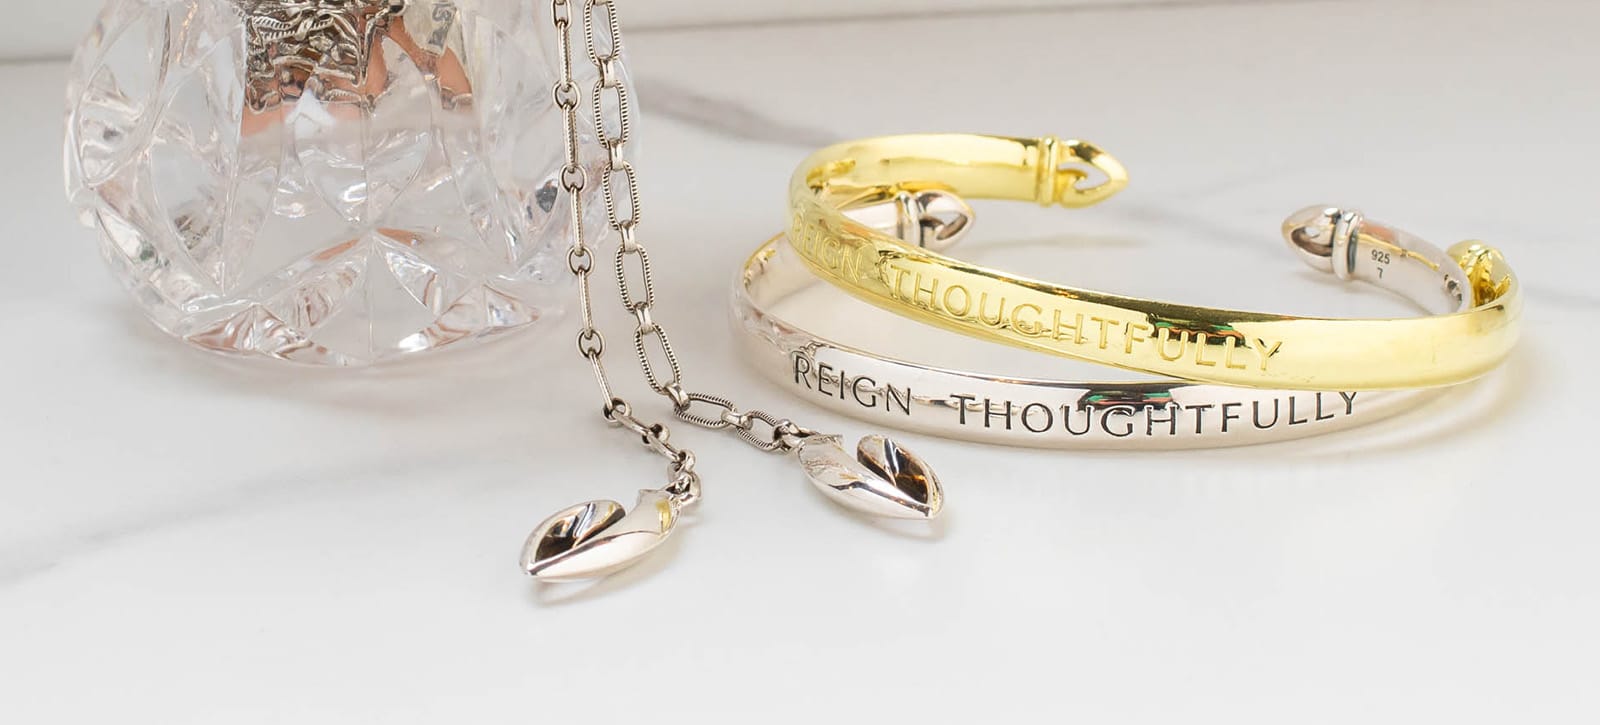 REALM Jewelry Reign Thoughtfully Cuffs from the Coronet Collection